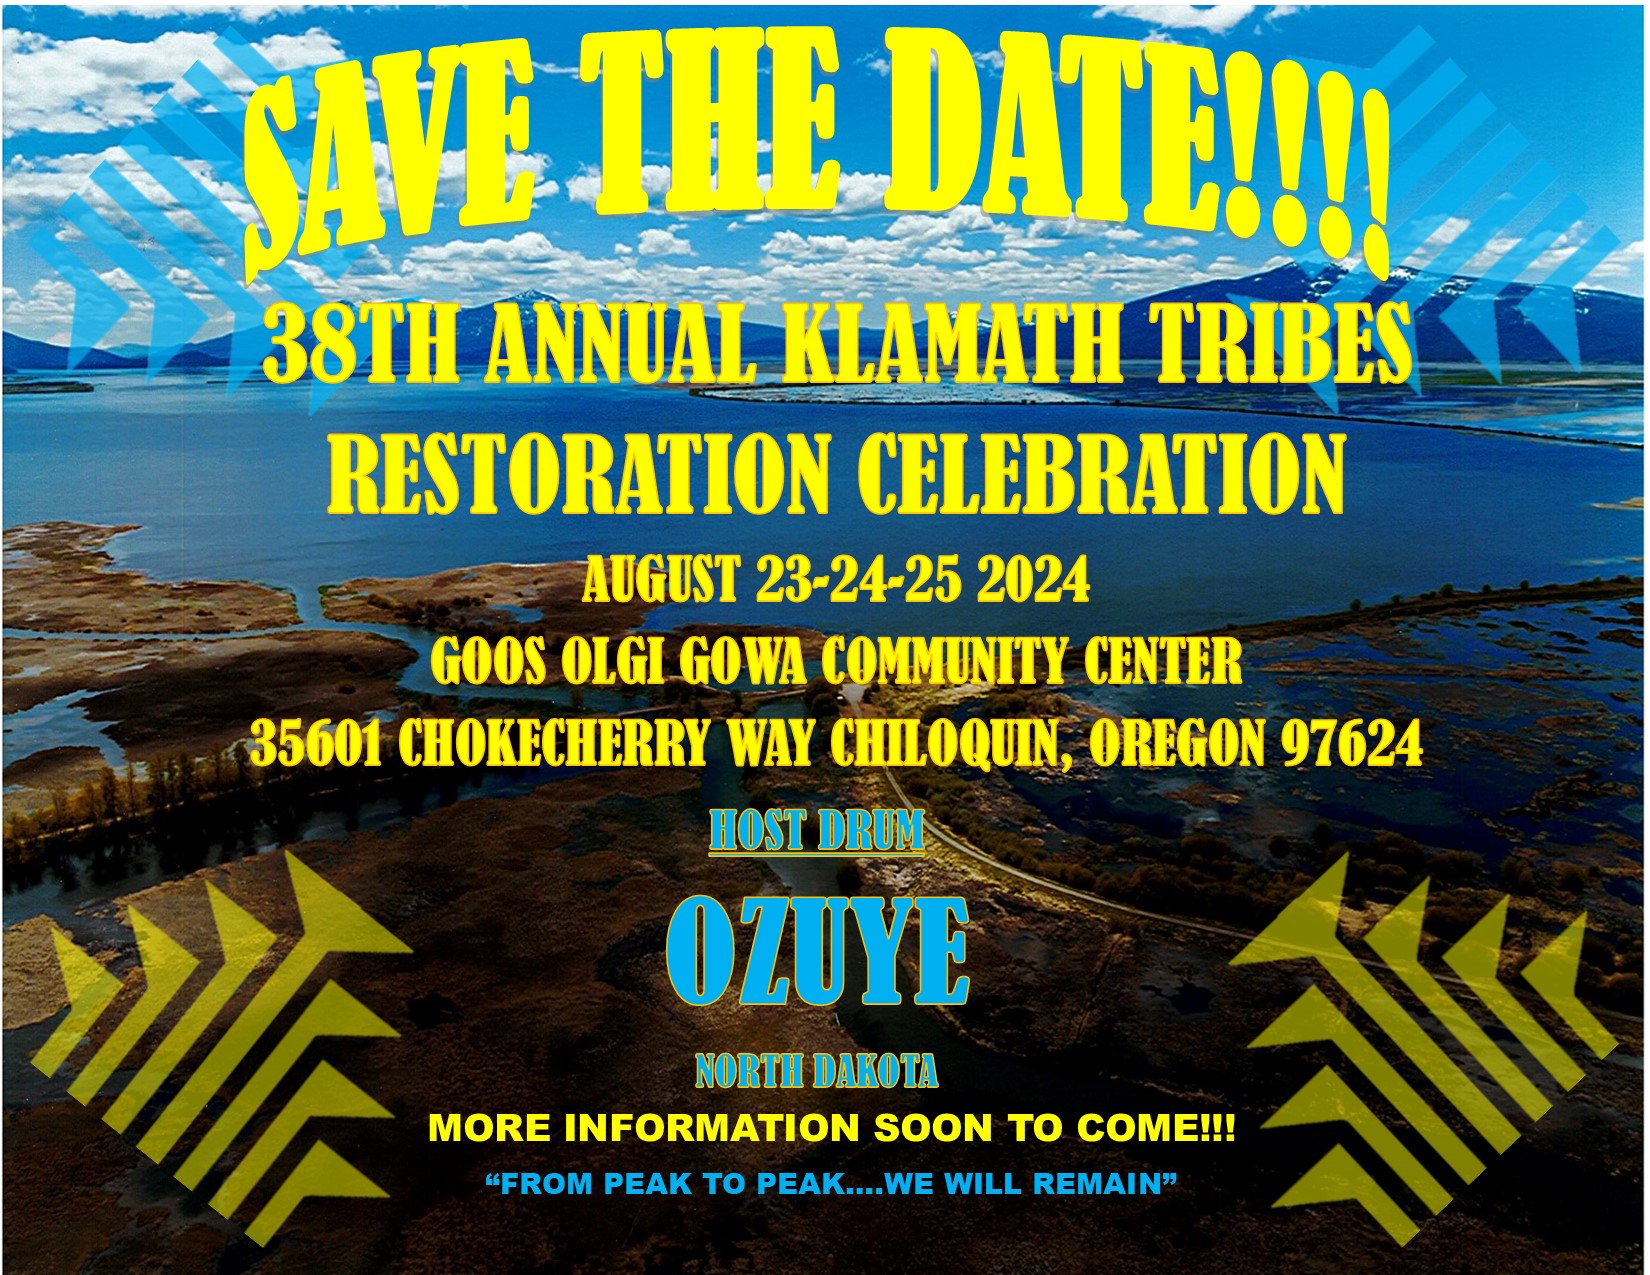 Official 37th annual Klamath Tribes Restoration Celebration poster